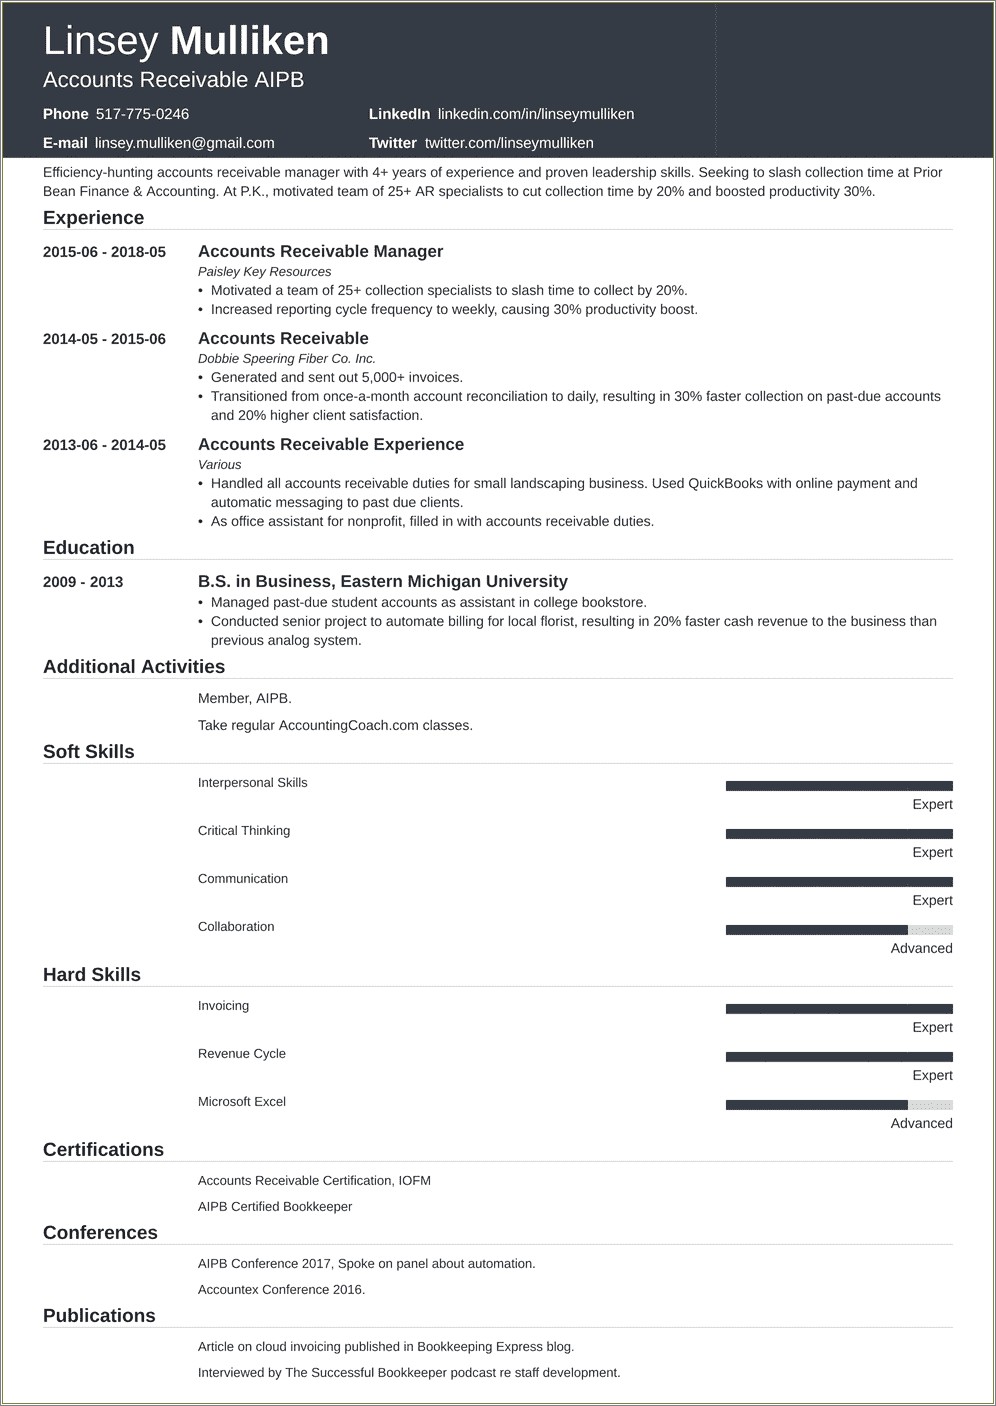 Resume Format For Assistant Manager Accounts Receivable